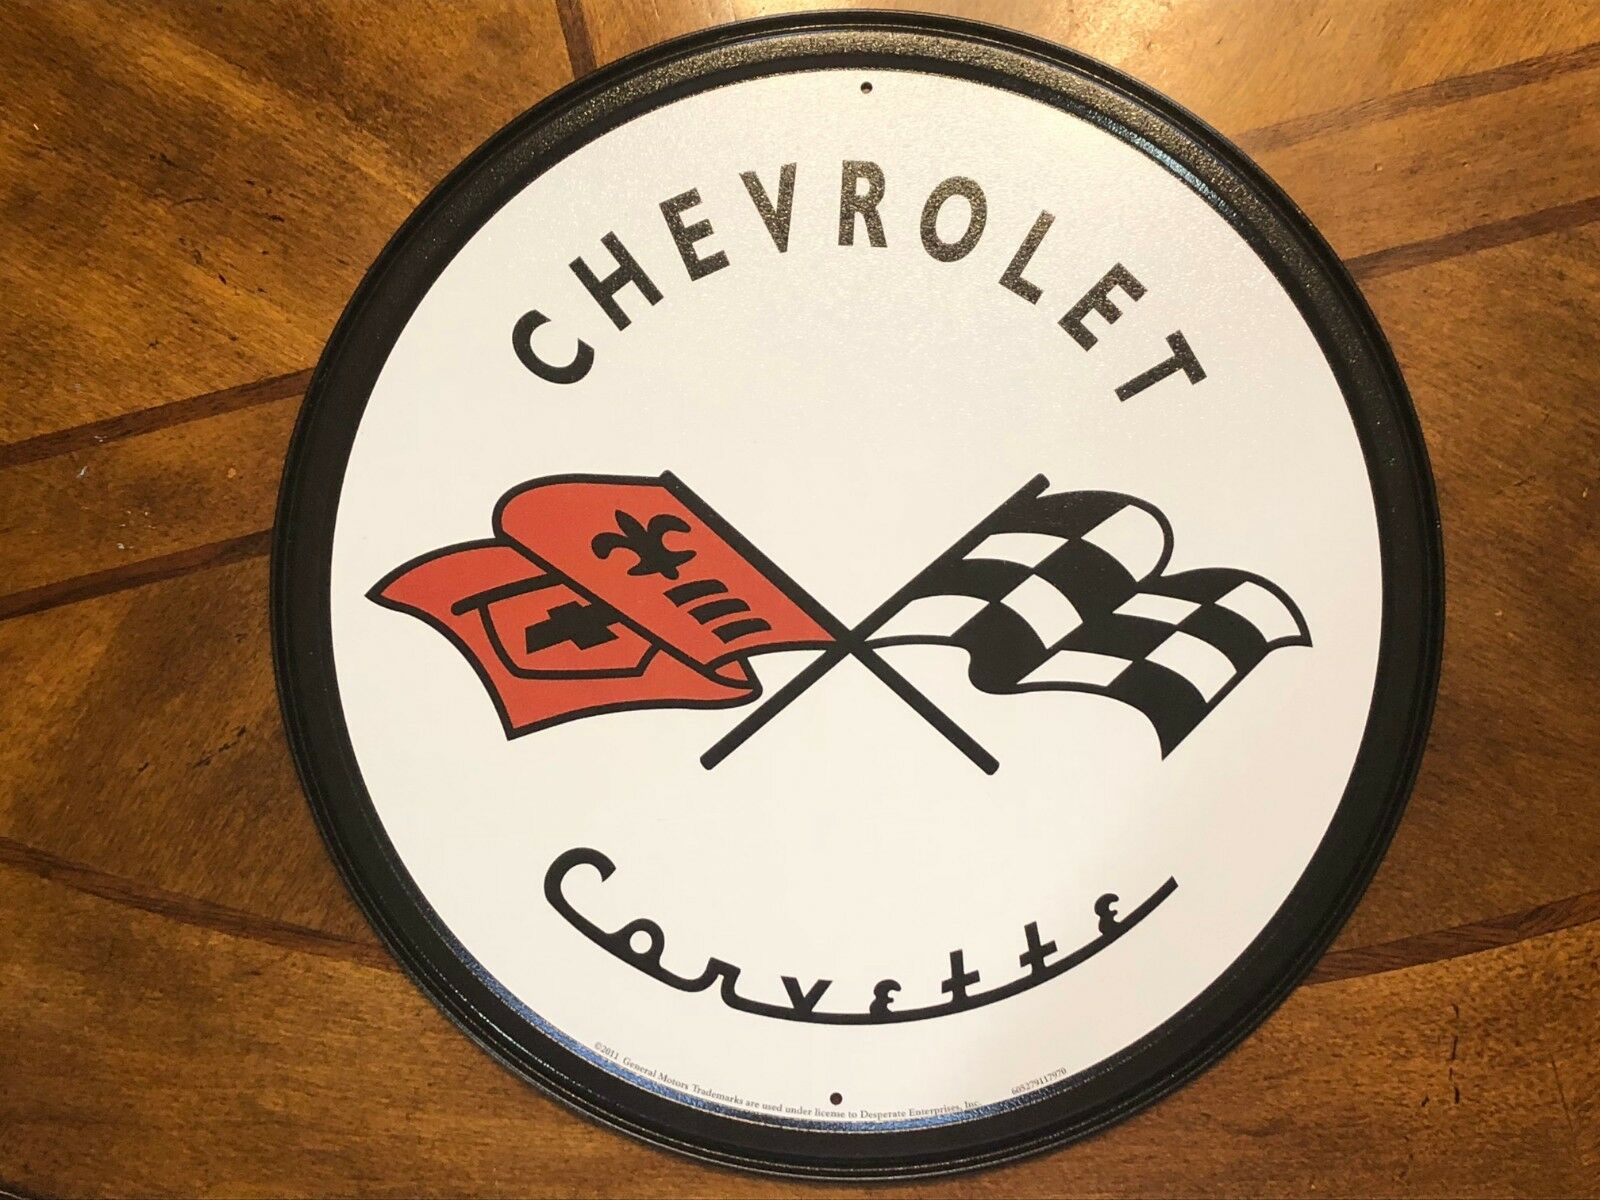 Chevrolet Corvette Racing Flags 12" Round Metal Wall Sign Garage Mancave Gm